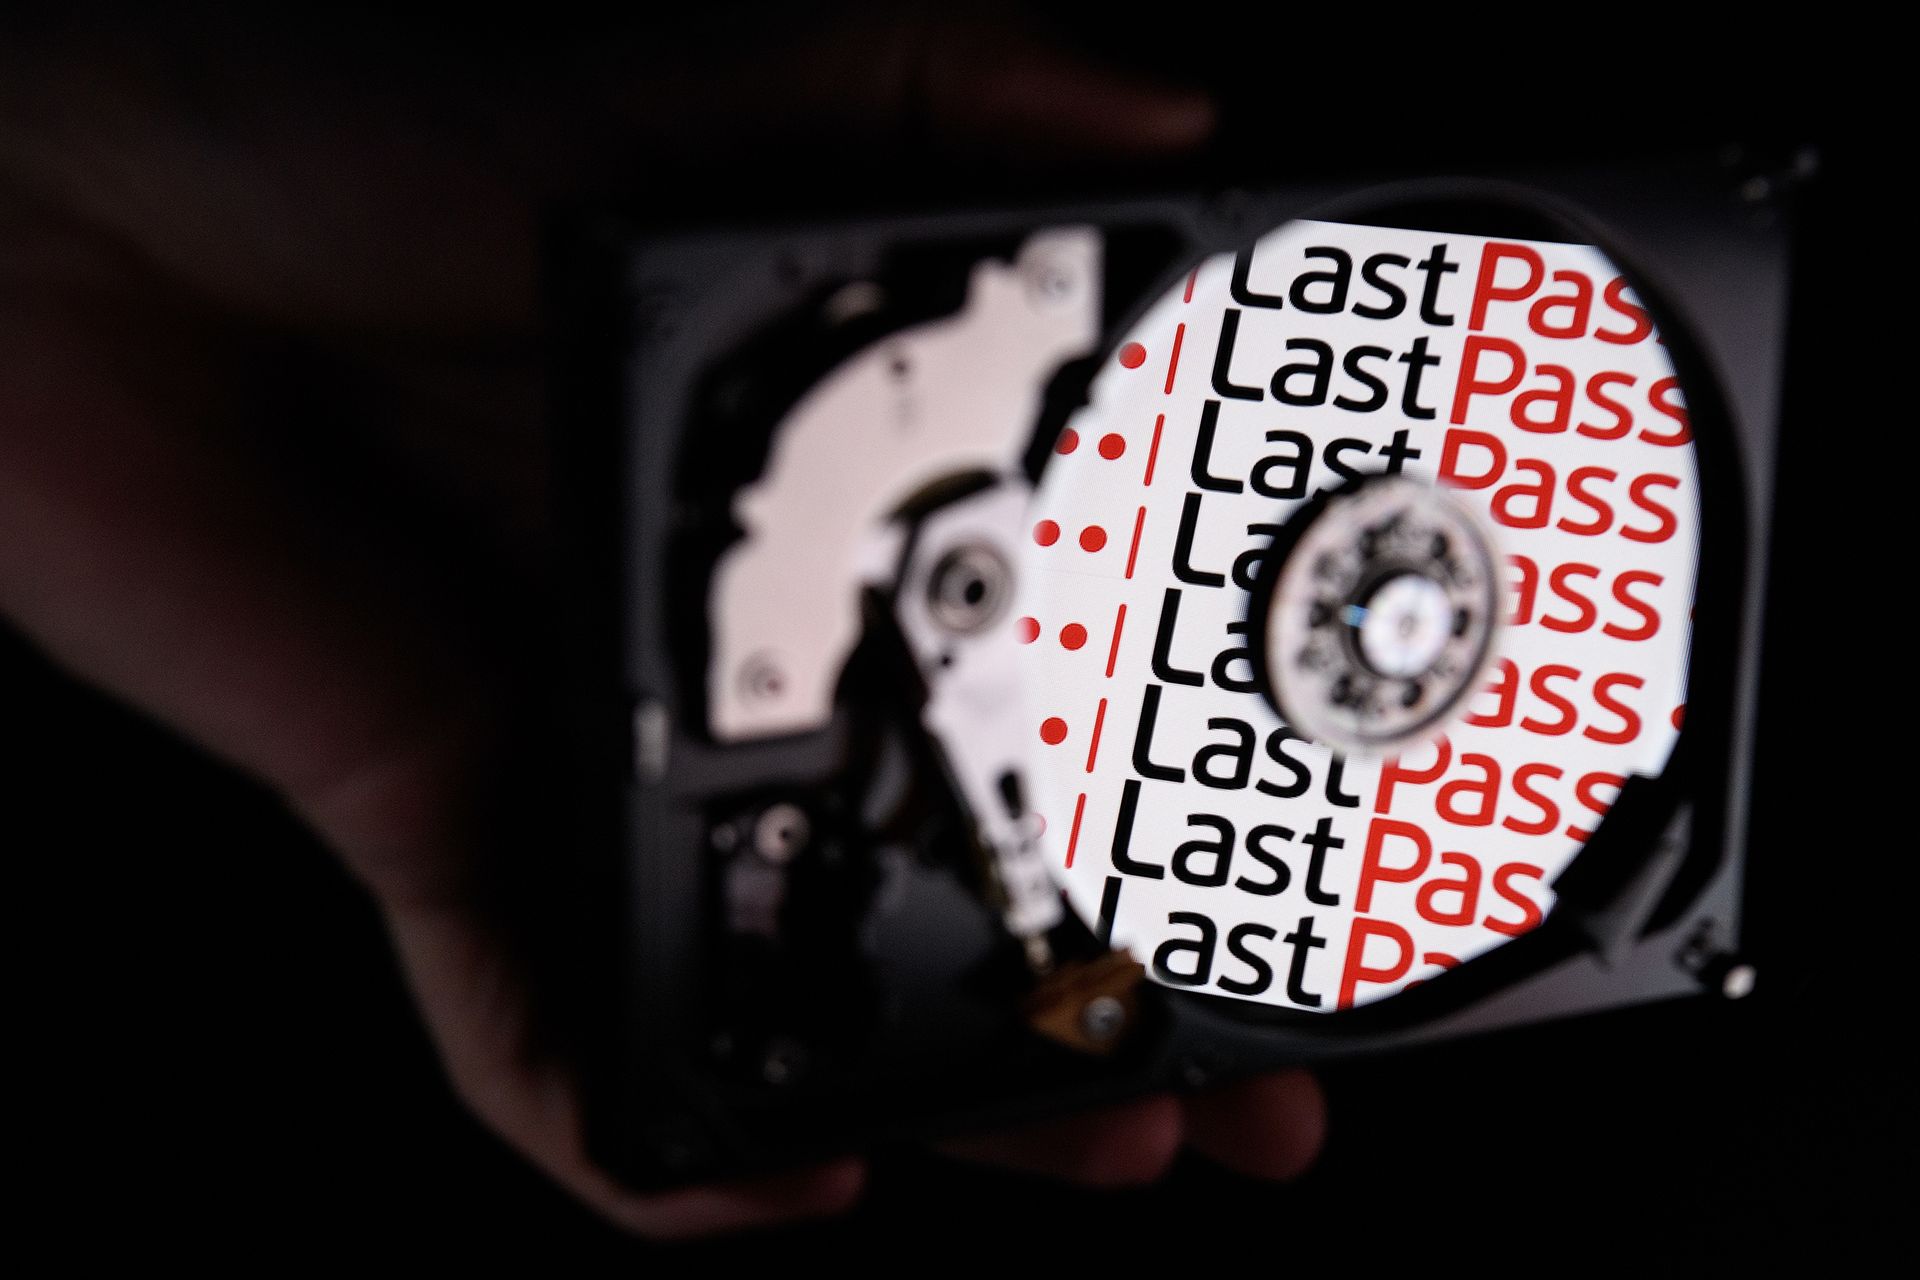 The logo for online password manager service LastPass is reflected on the internal discs of a hard drive.